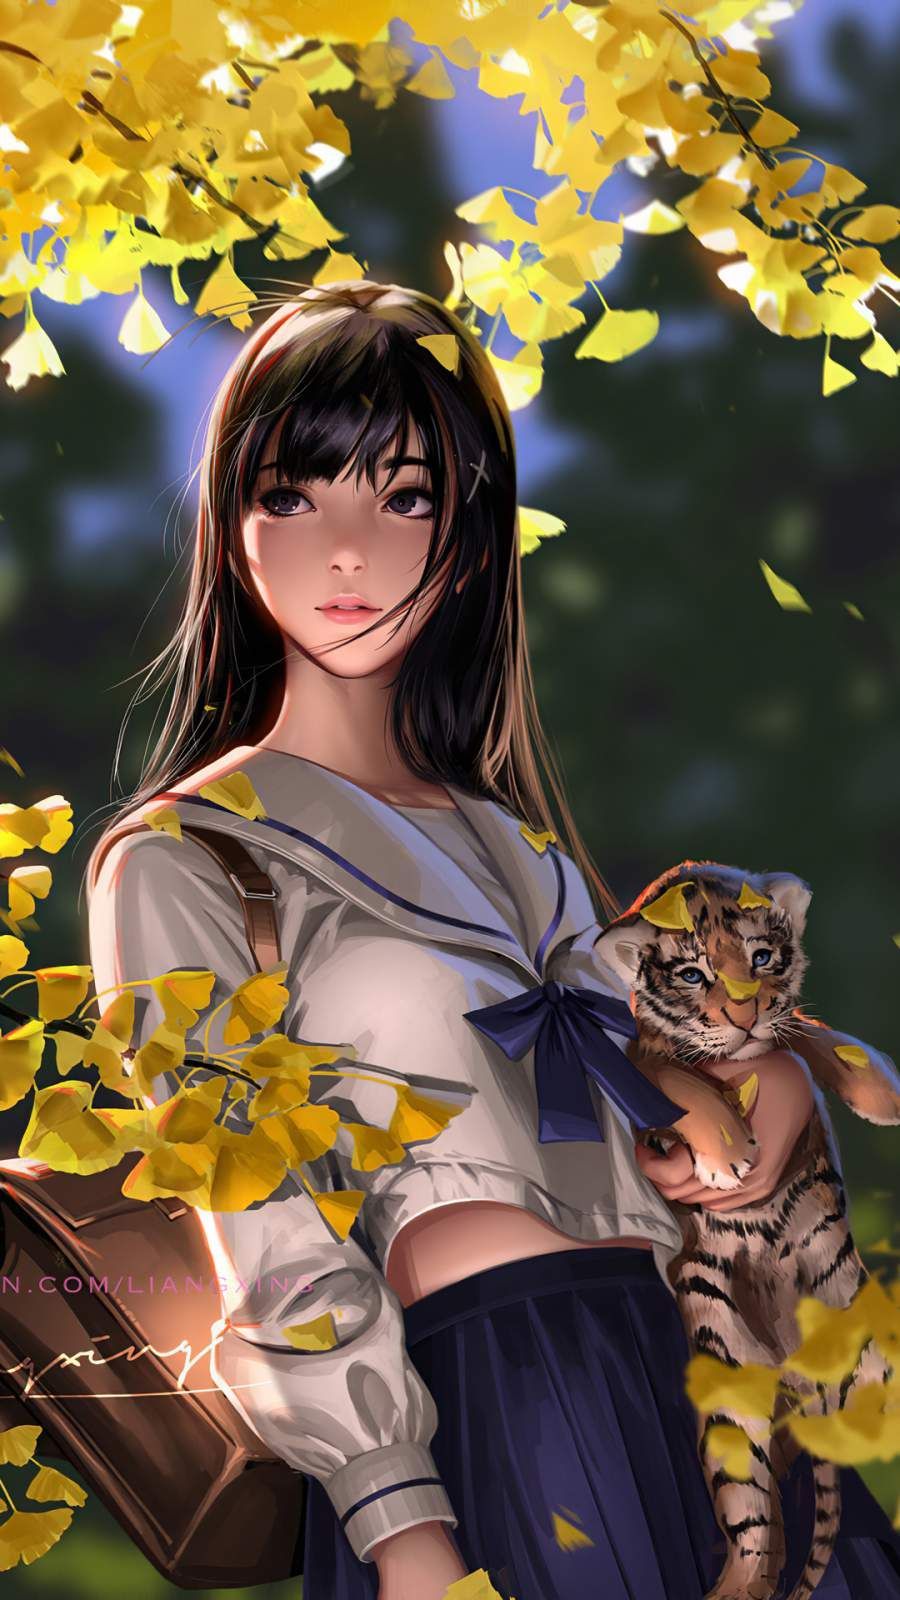 Autumn Girl with Cubs iPhone Wallpaper. Long hair styles, Anime wallpaper iphone, Anime wallpaper